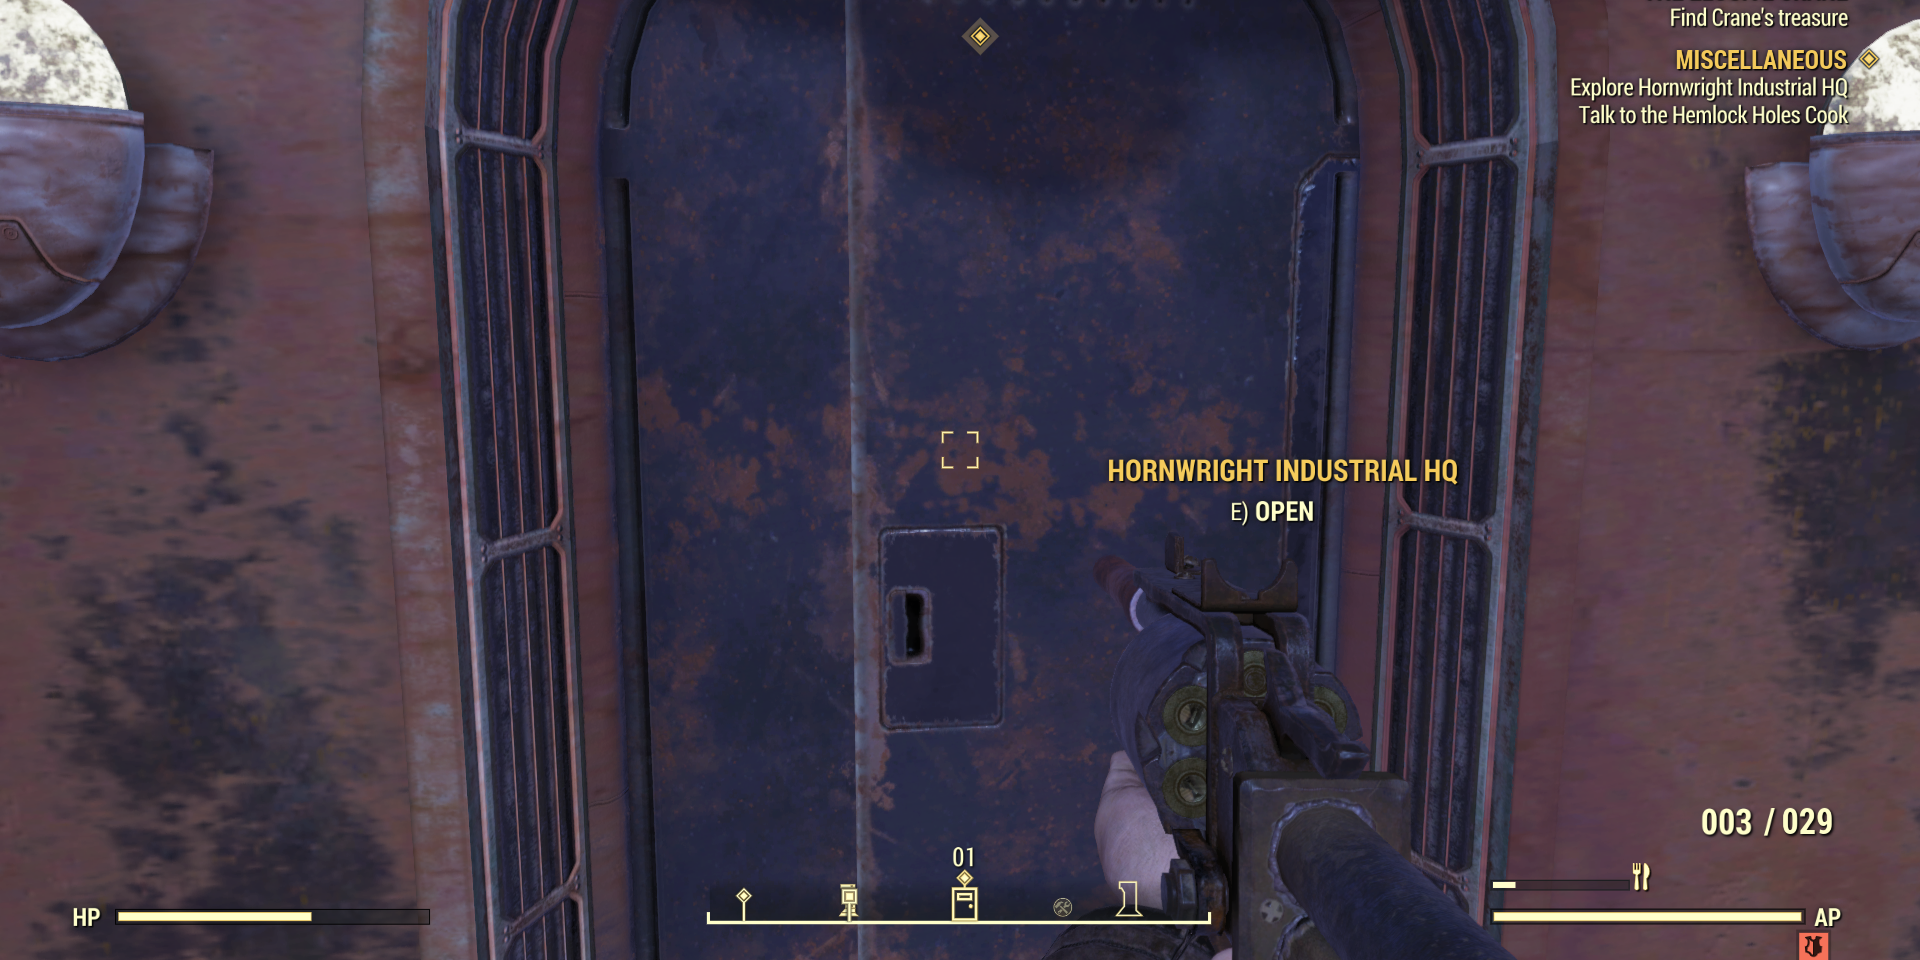 Image of the entrance to the Hornwright Industrial HQ in Fallout 76